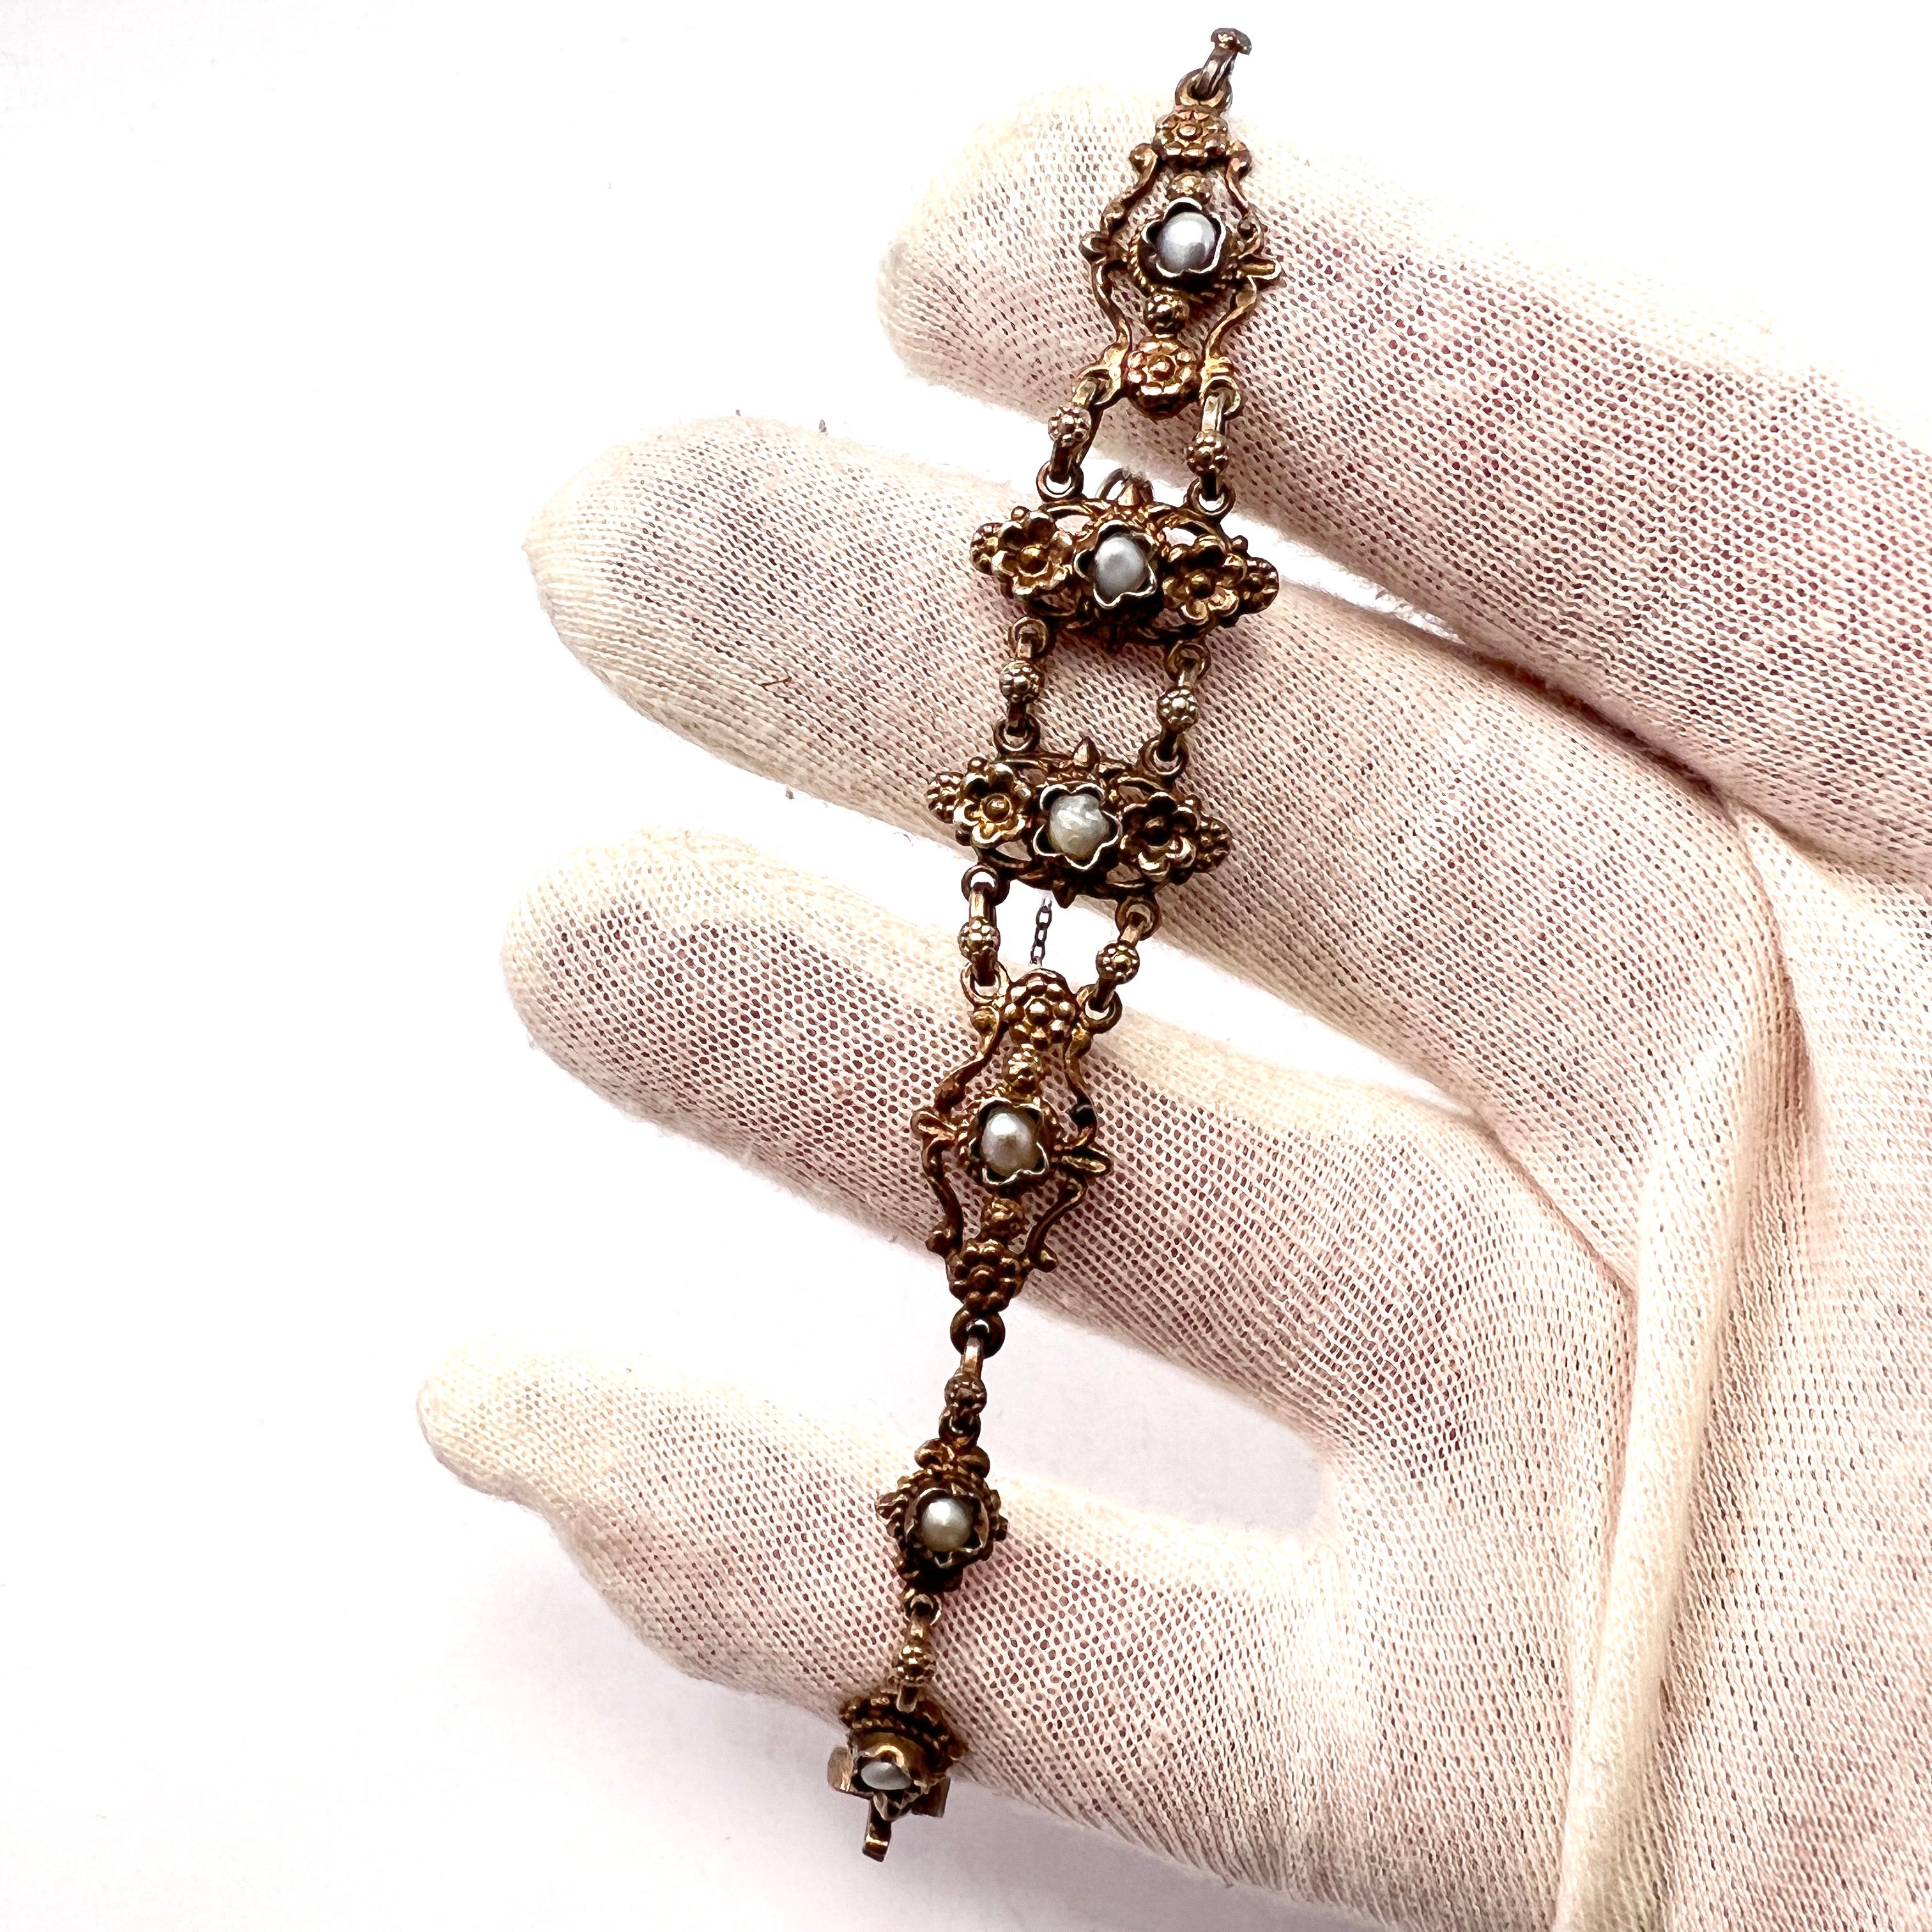 Antique Austro-Hungarian Arts and Crafts Silver Pearl Bracelet.